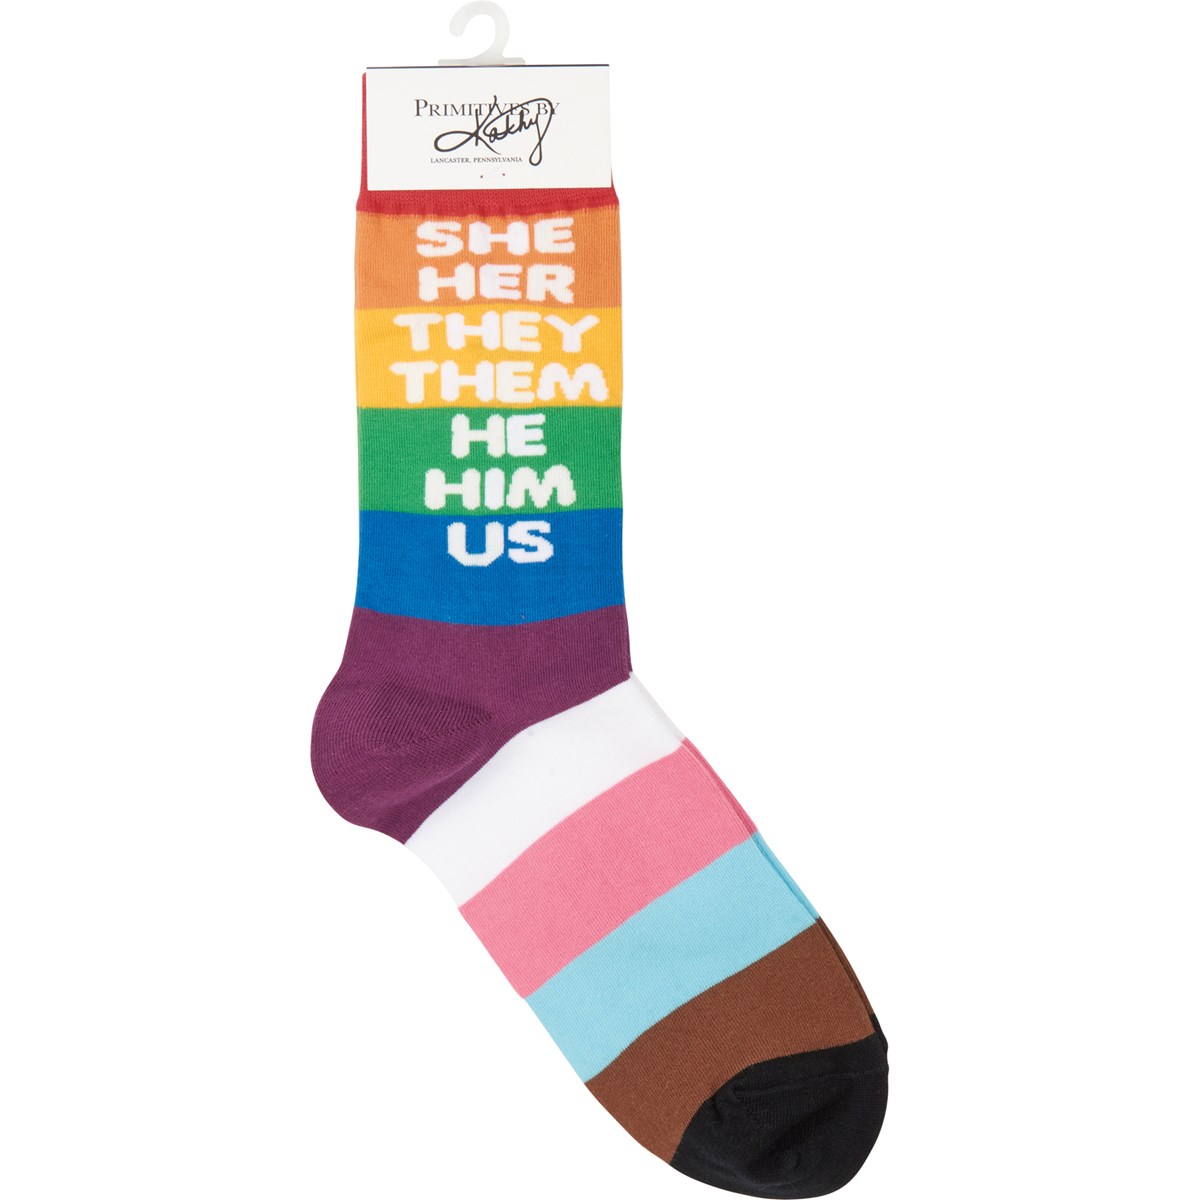 Socks - She Her They Them He Him Us - One Size Fits Most - Cotton, Nylon, Spandex